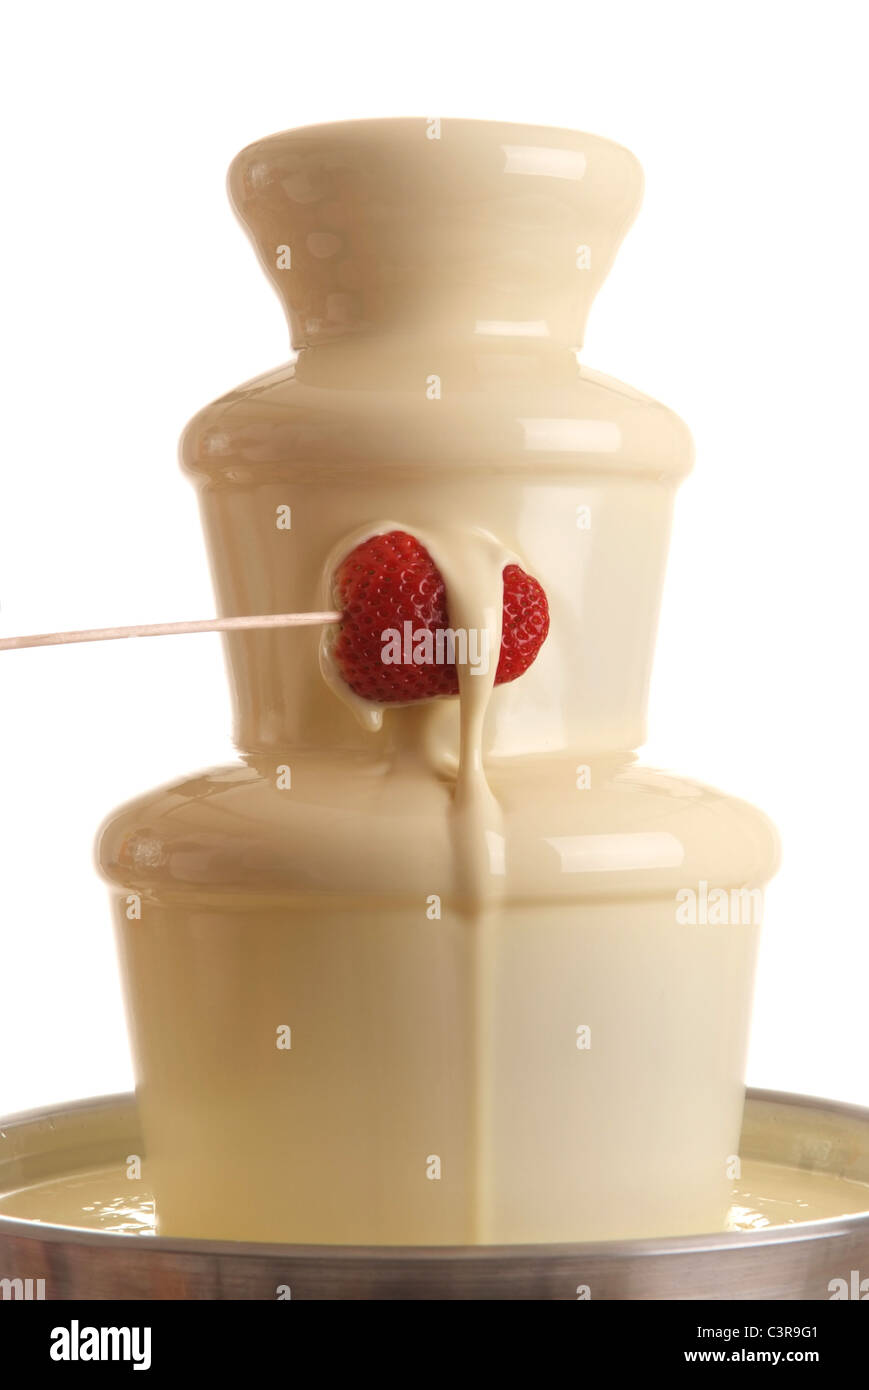 white chocolate fountain with strawberry dipped Stock Photo